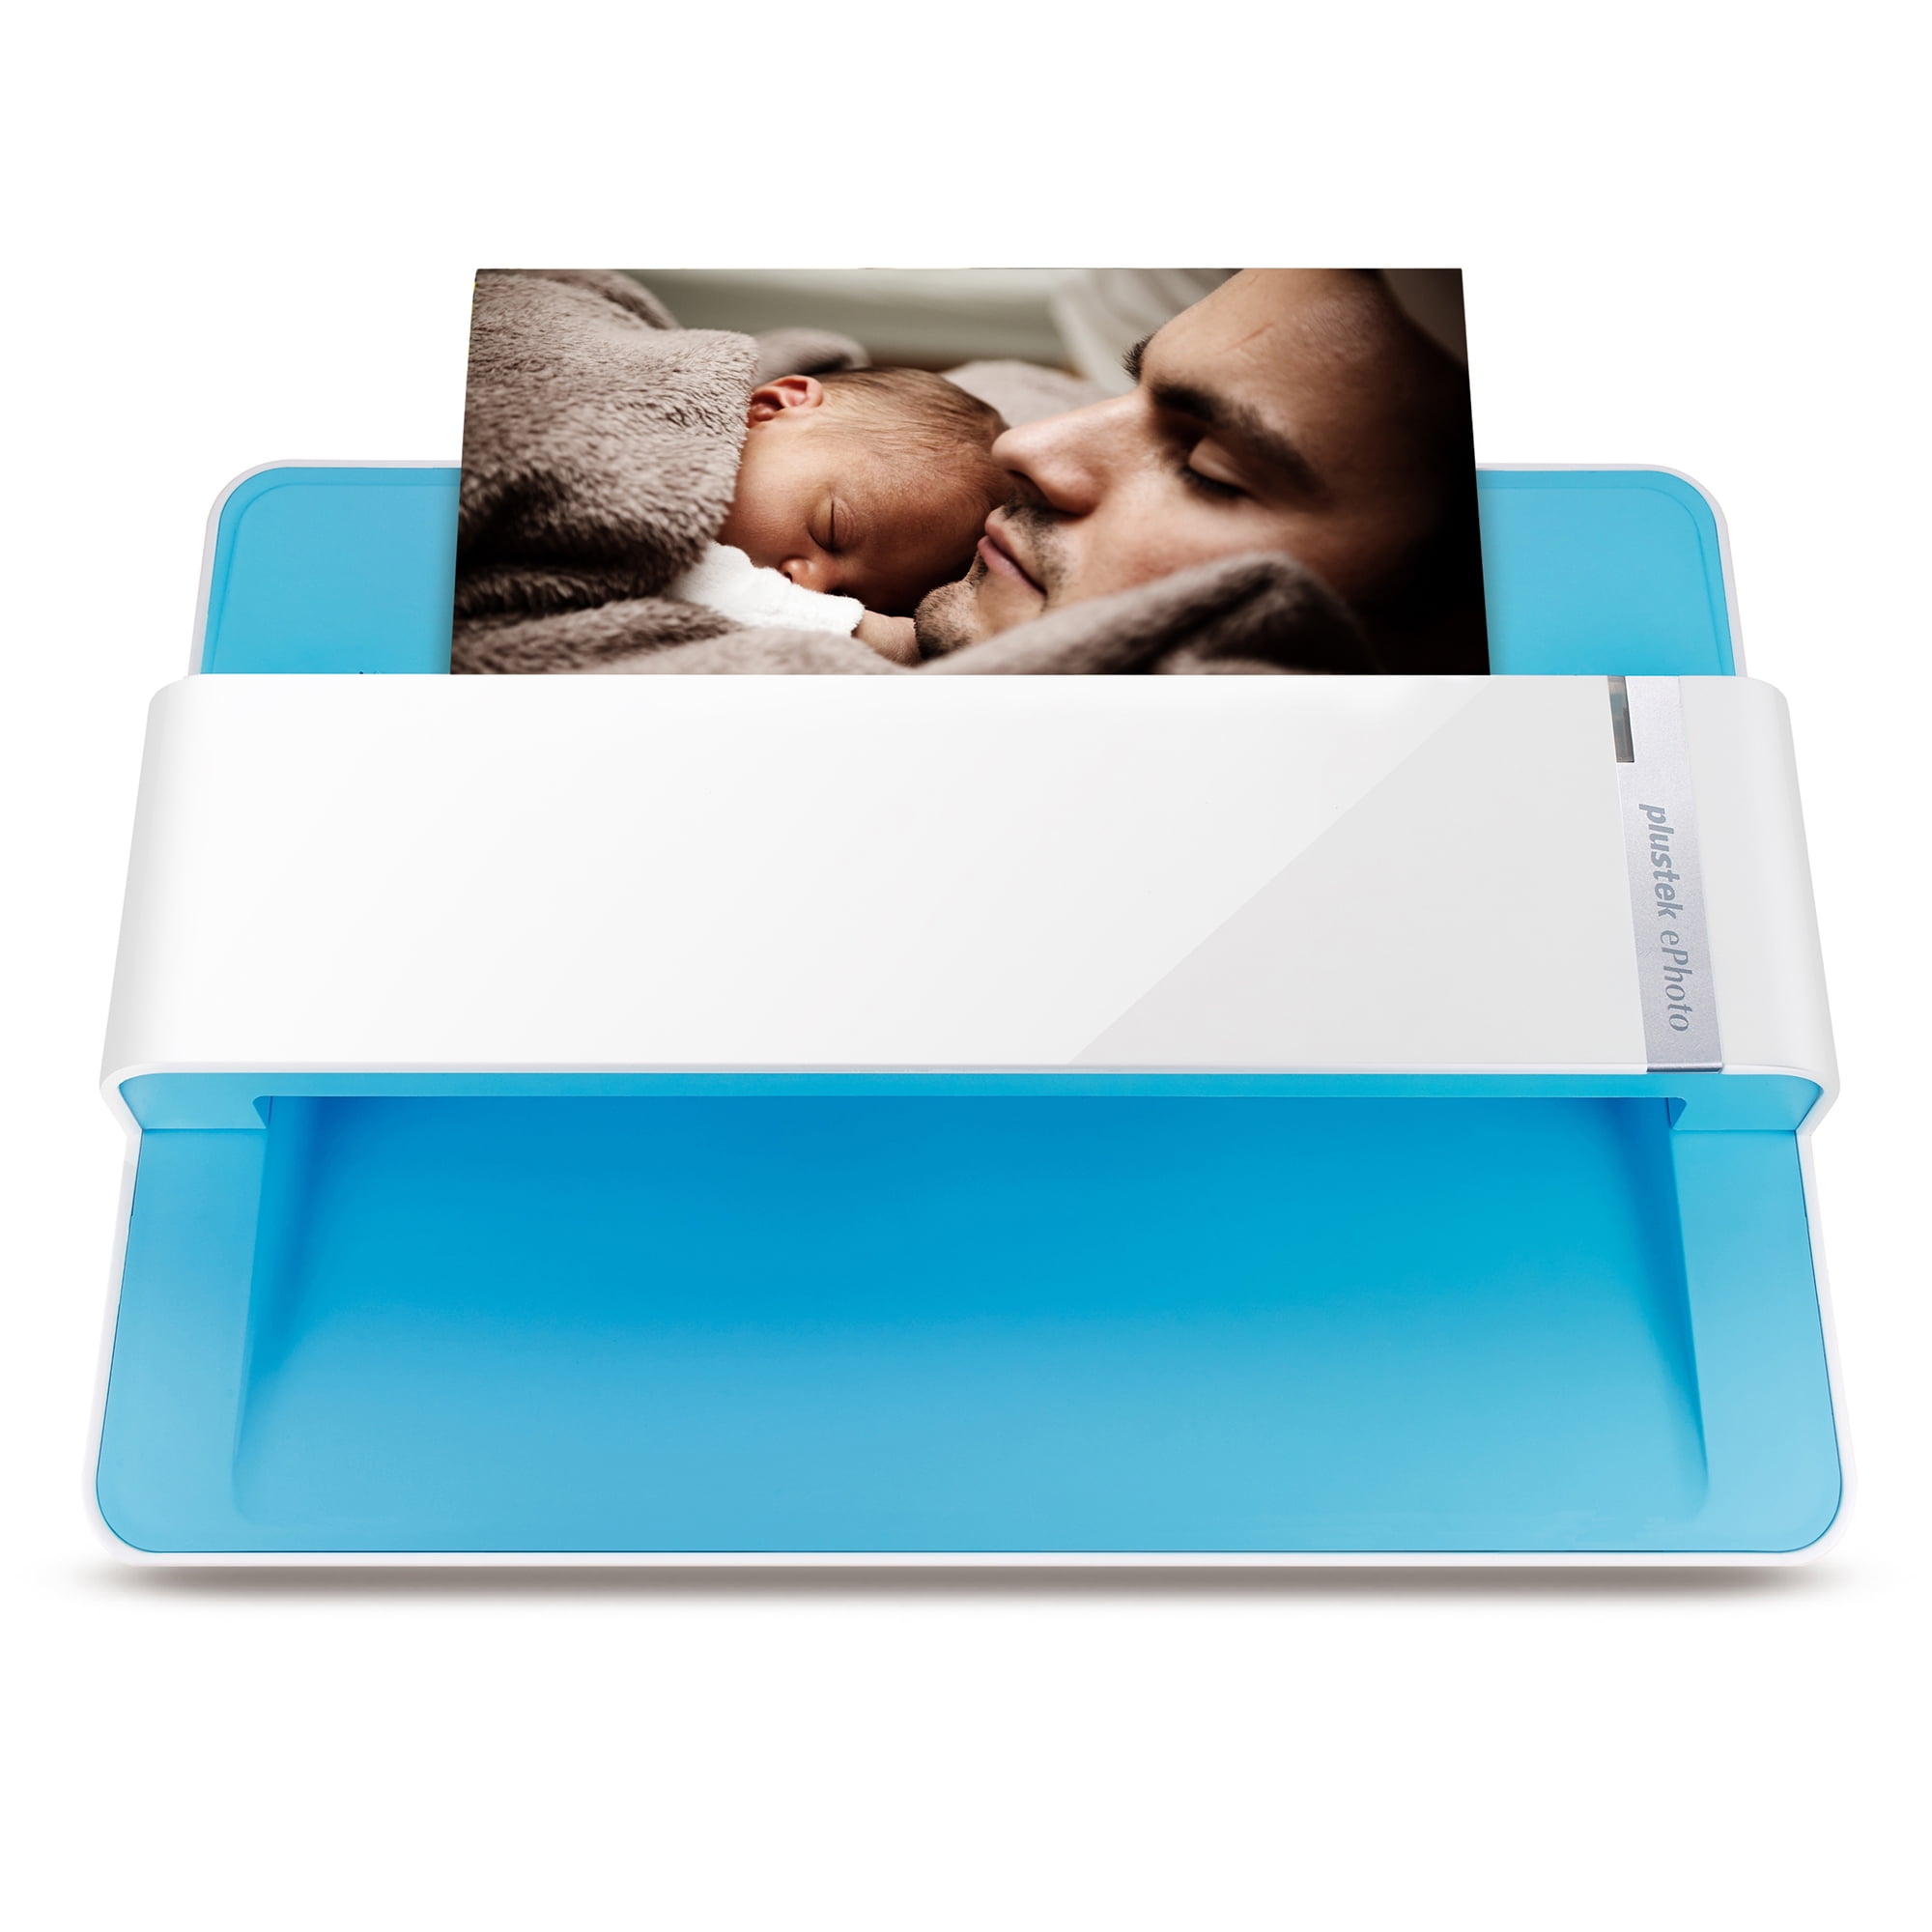 with Microfiber Cloth Approx Plustek ePhoto Z300 Photos and Documents Scanner 300dpi Optical Resolution 8.5x11.7 Maximum Scanning Area 2 Sec 4X 6 Photo 